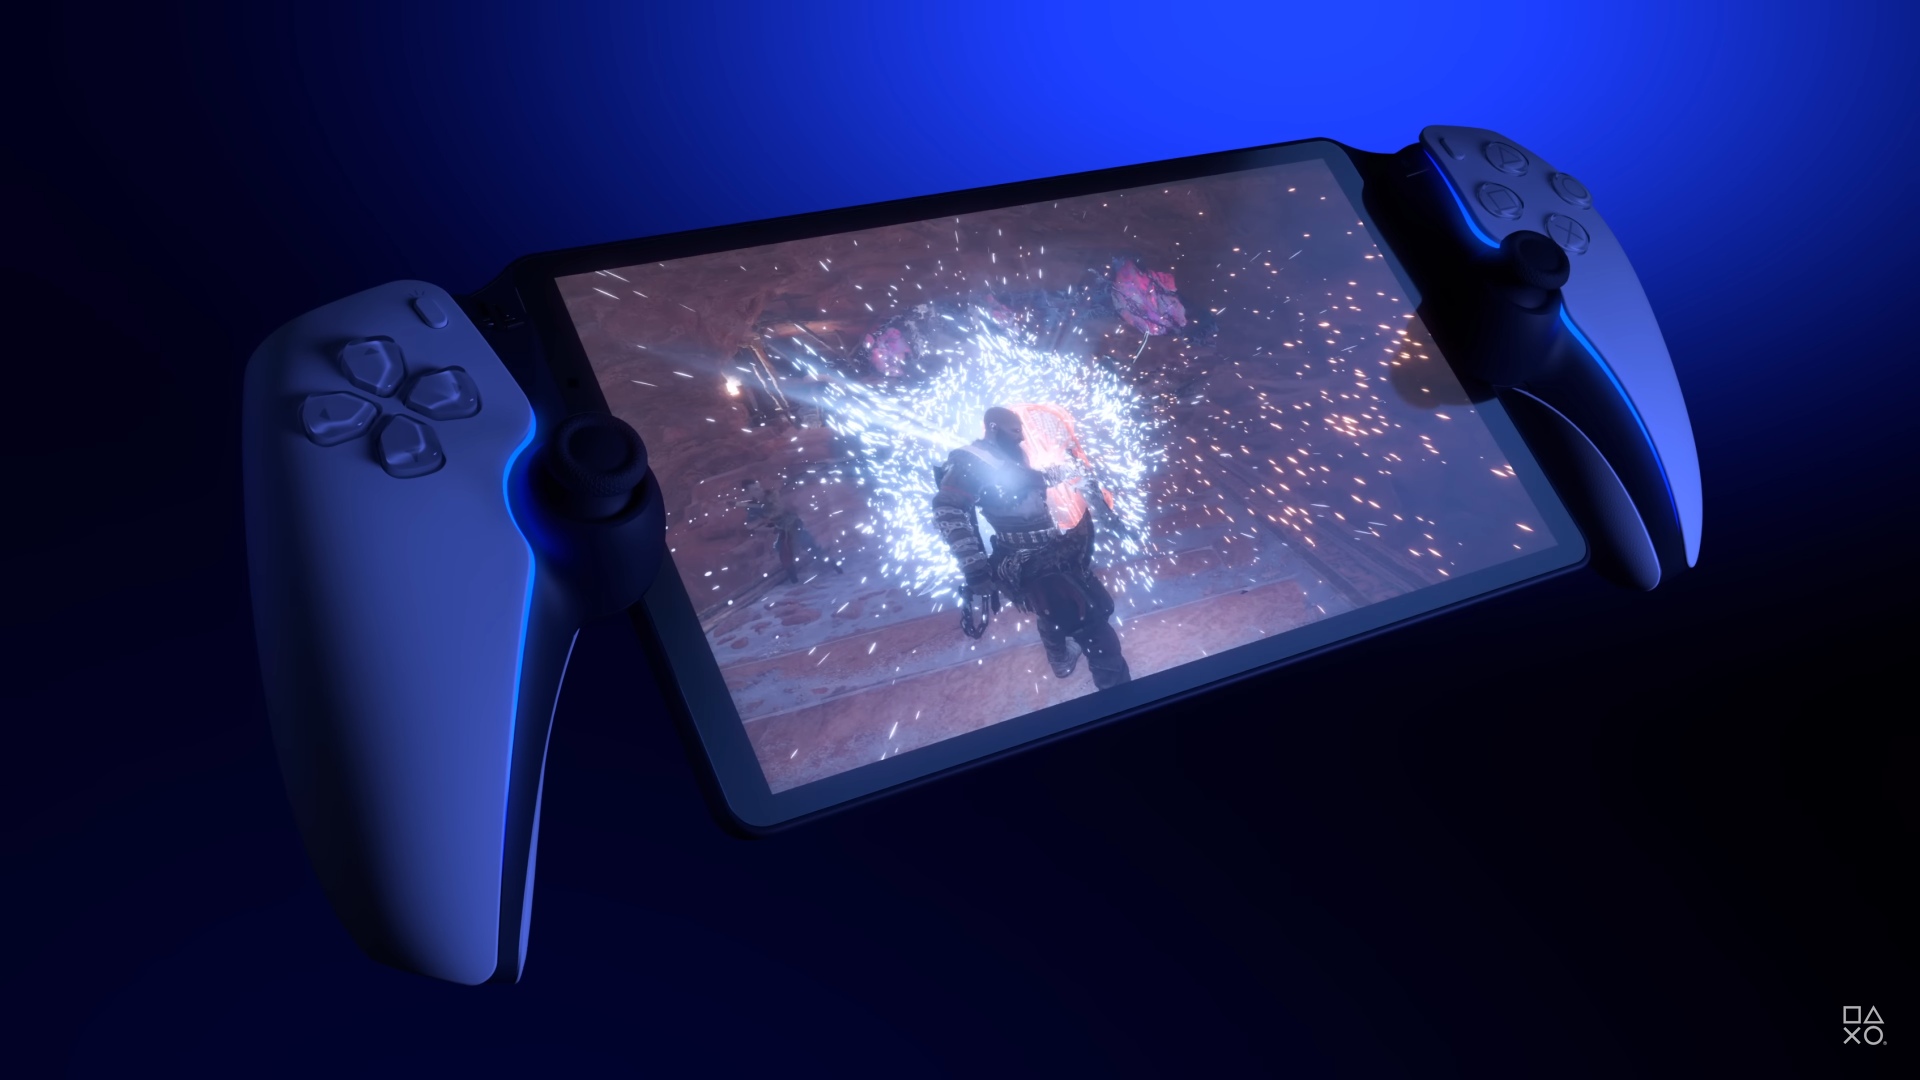 Sony unveils 'Project Q', a portable streaming device for PS5

